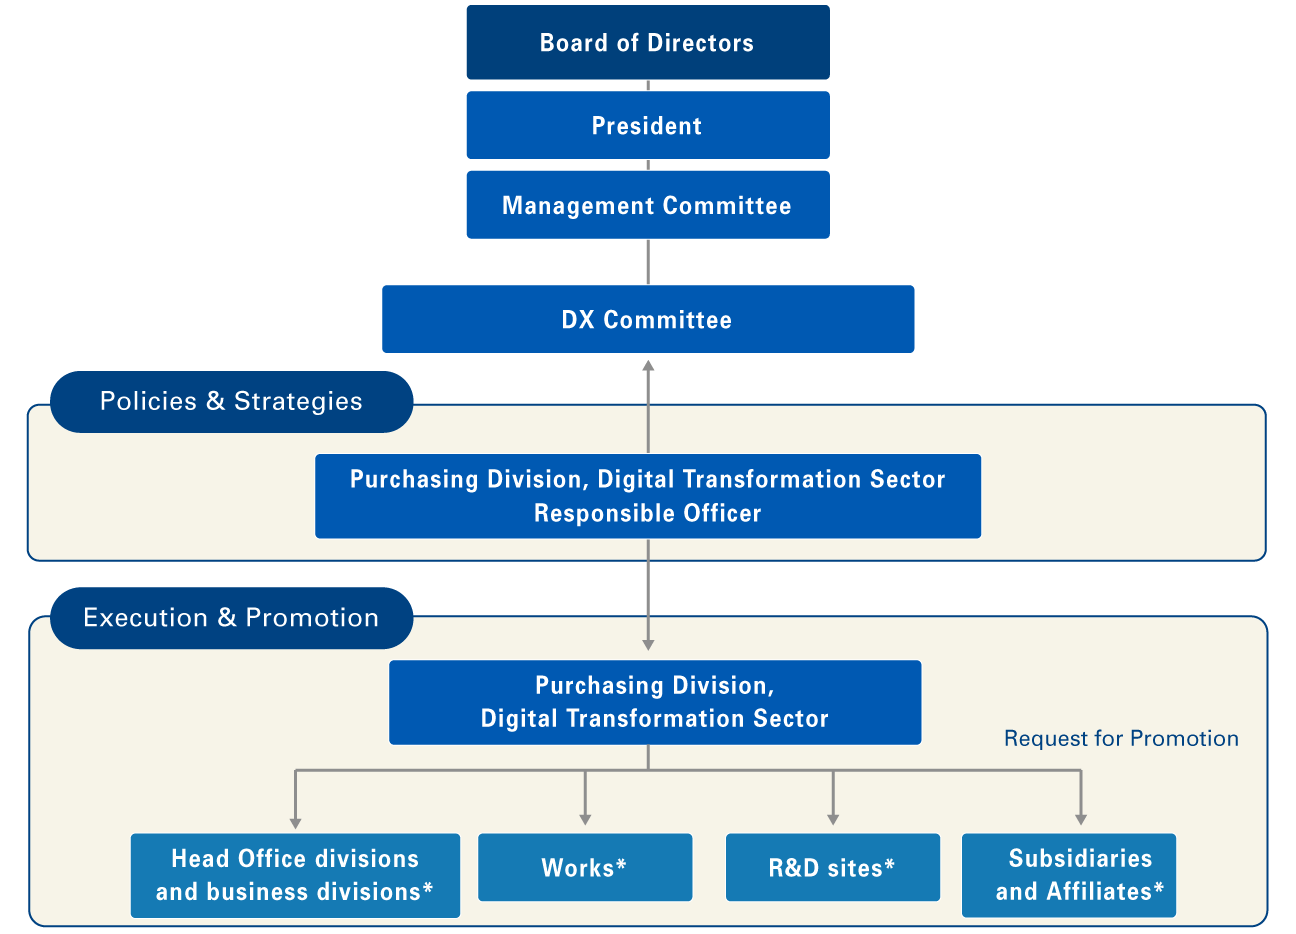 System and Responsible Officers